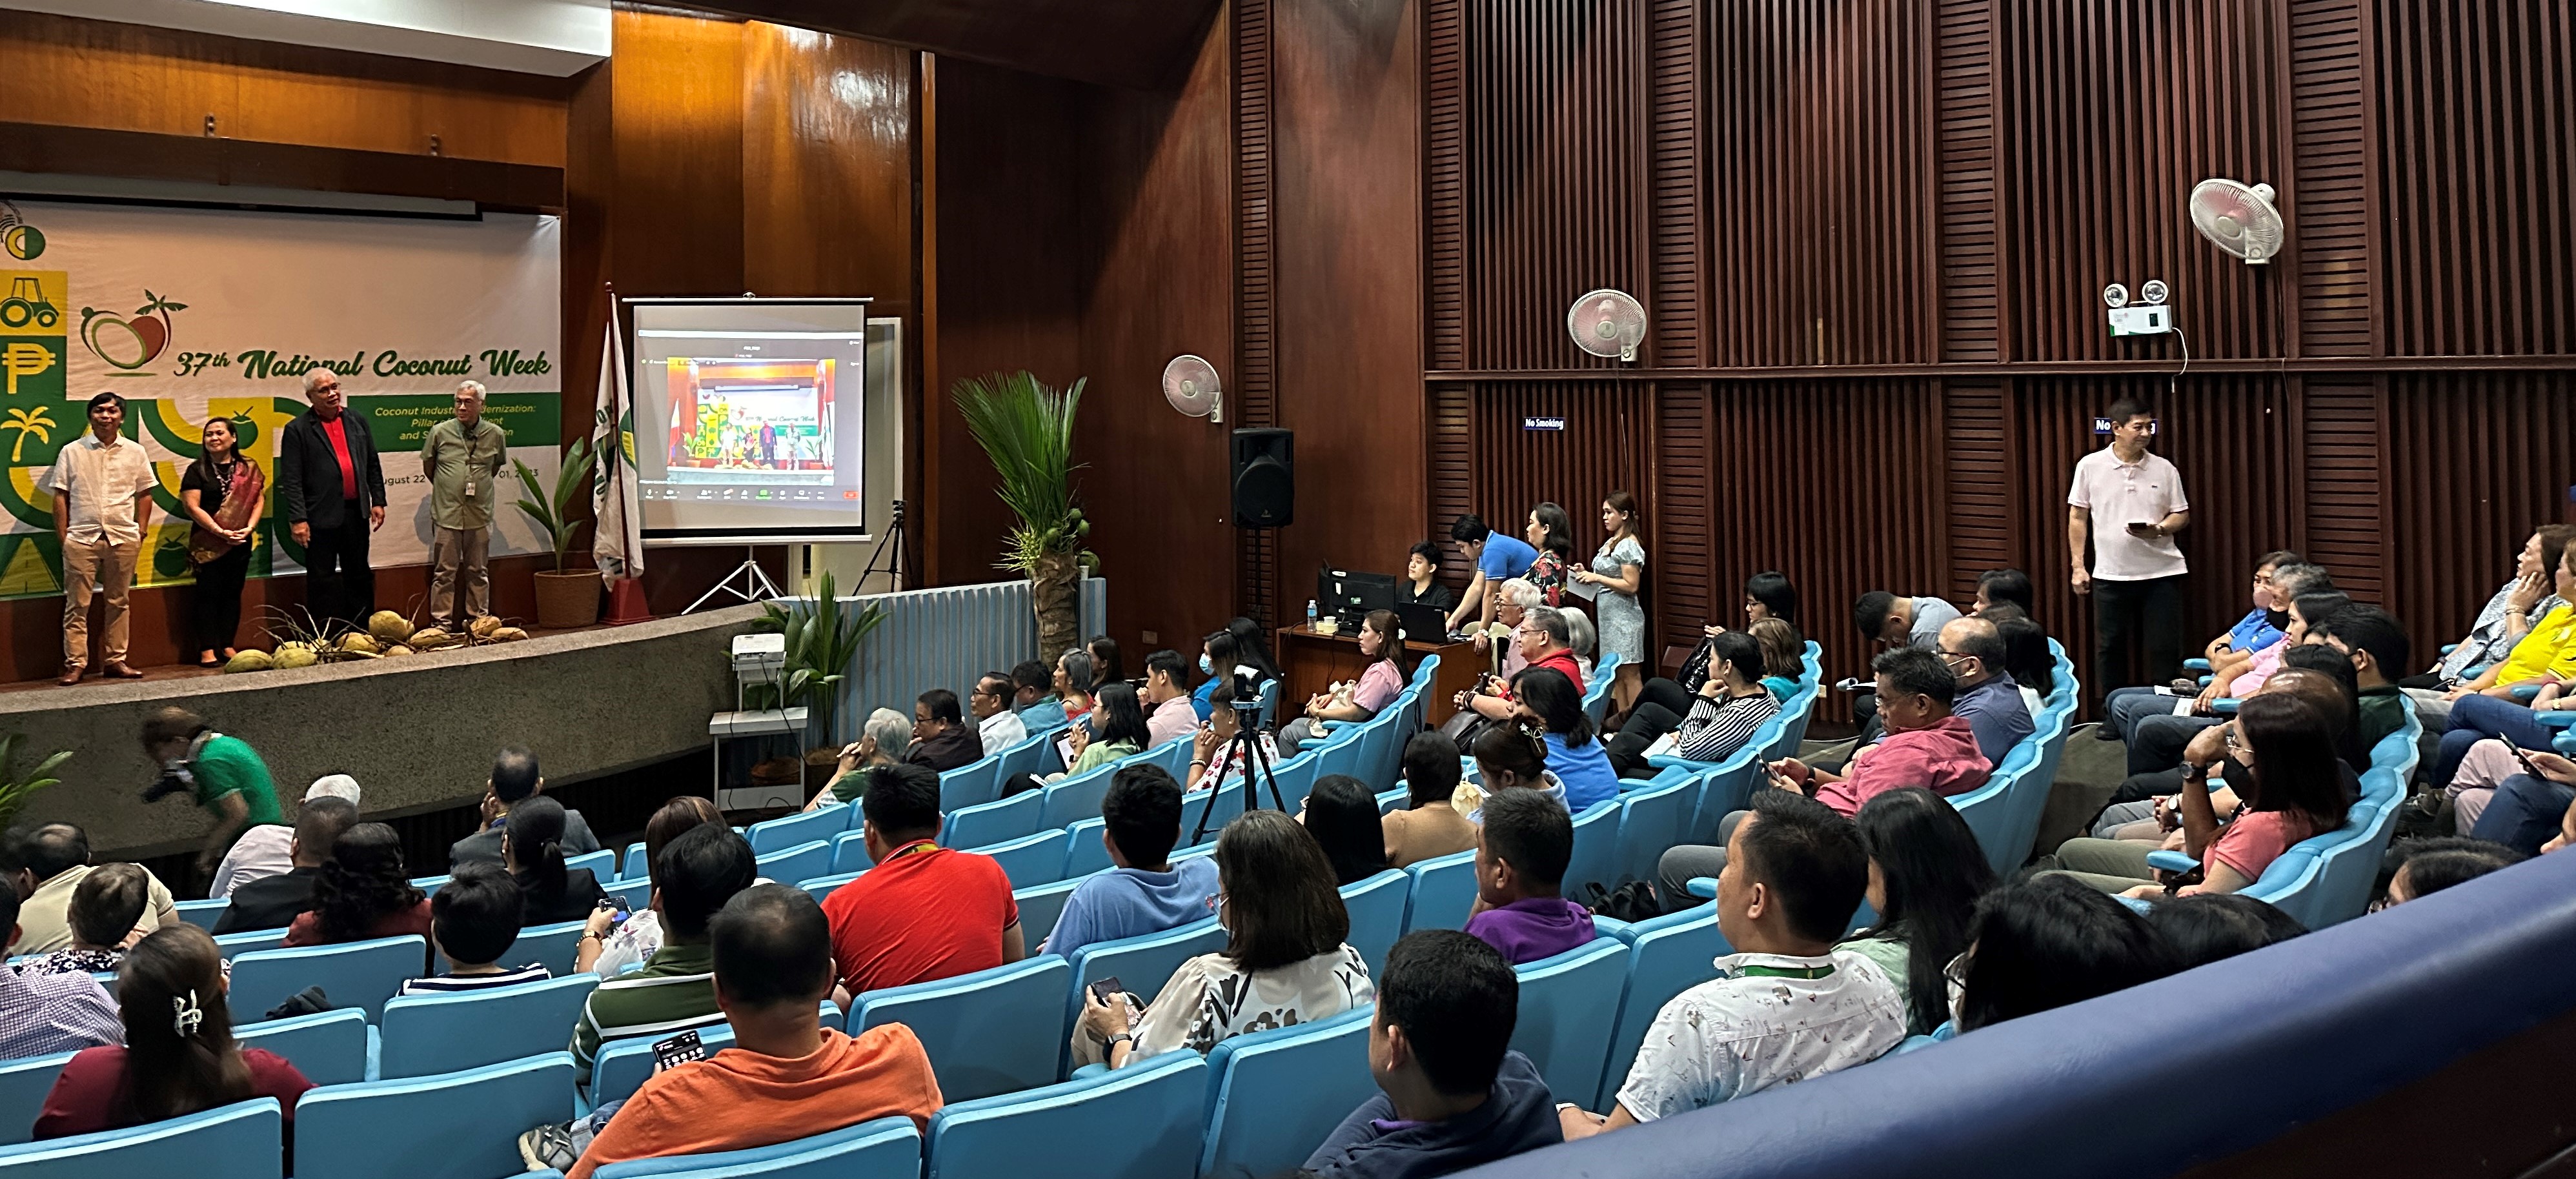 Participants during the opening ceremony of the 37th National Coconut Week. Image credit: Crops Research Division, DOST-PCAARRD. (Image credit: Crops Research Division, DOST-PCAARRD)